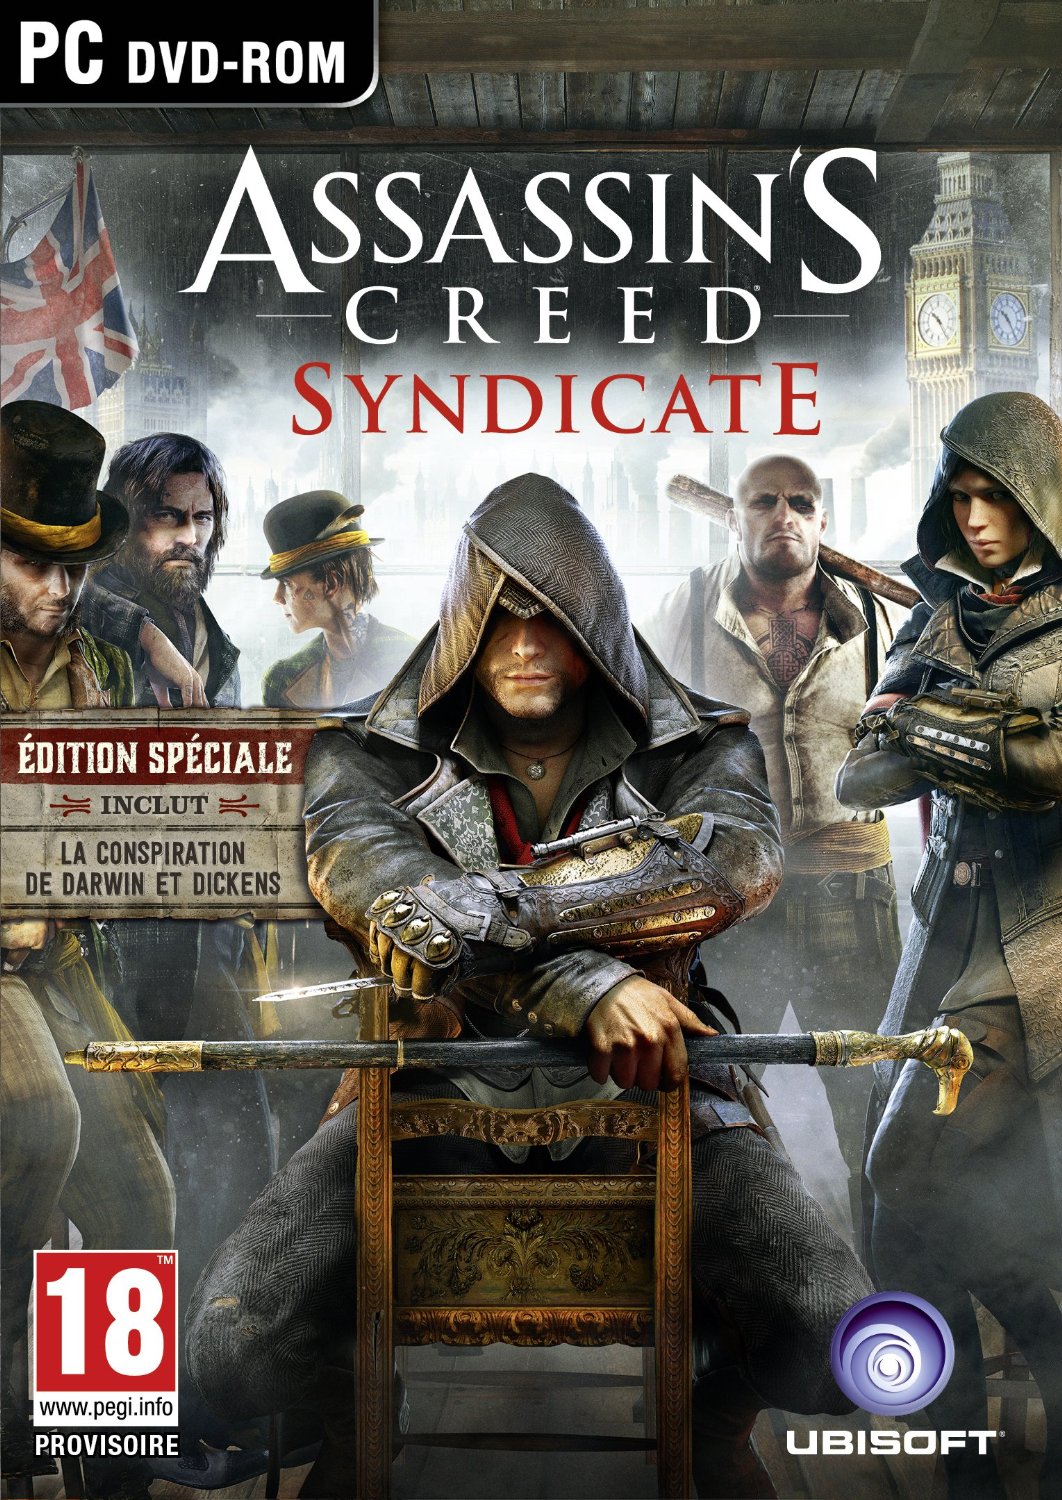 Bote de Assassin's Creed Syndicate